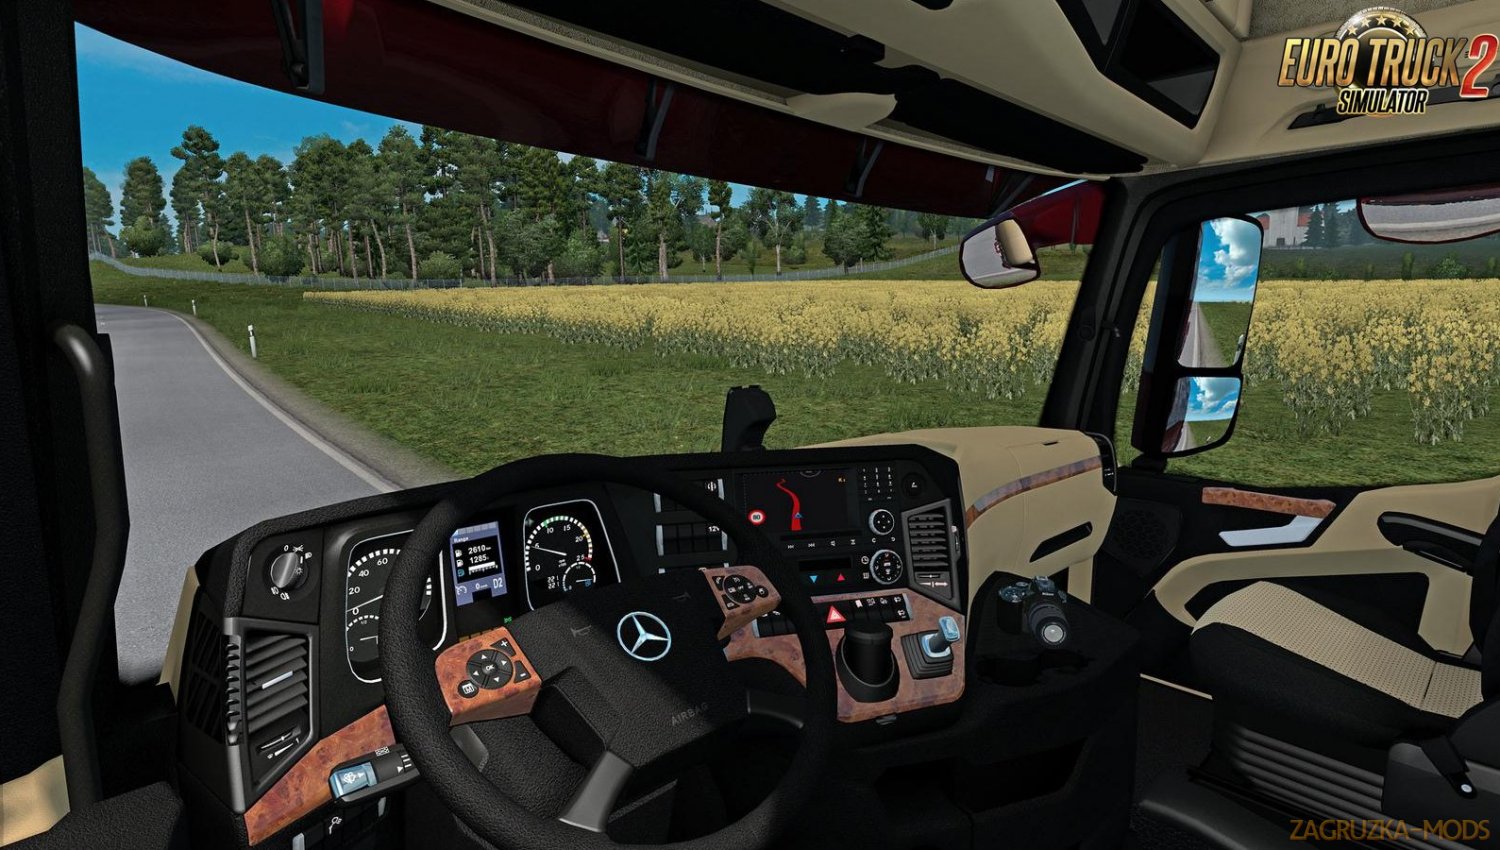 Unlimited Cabin view for Ets2